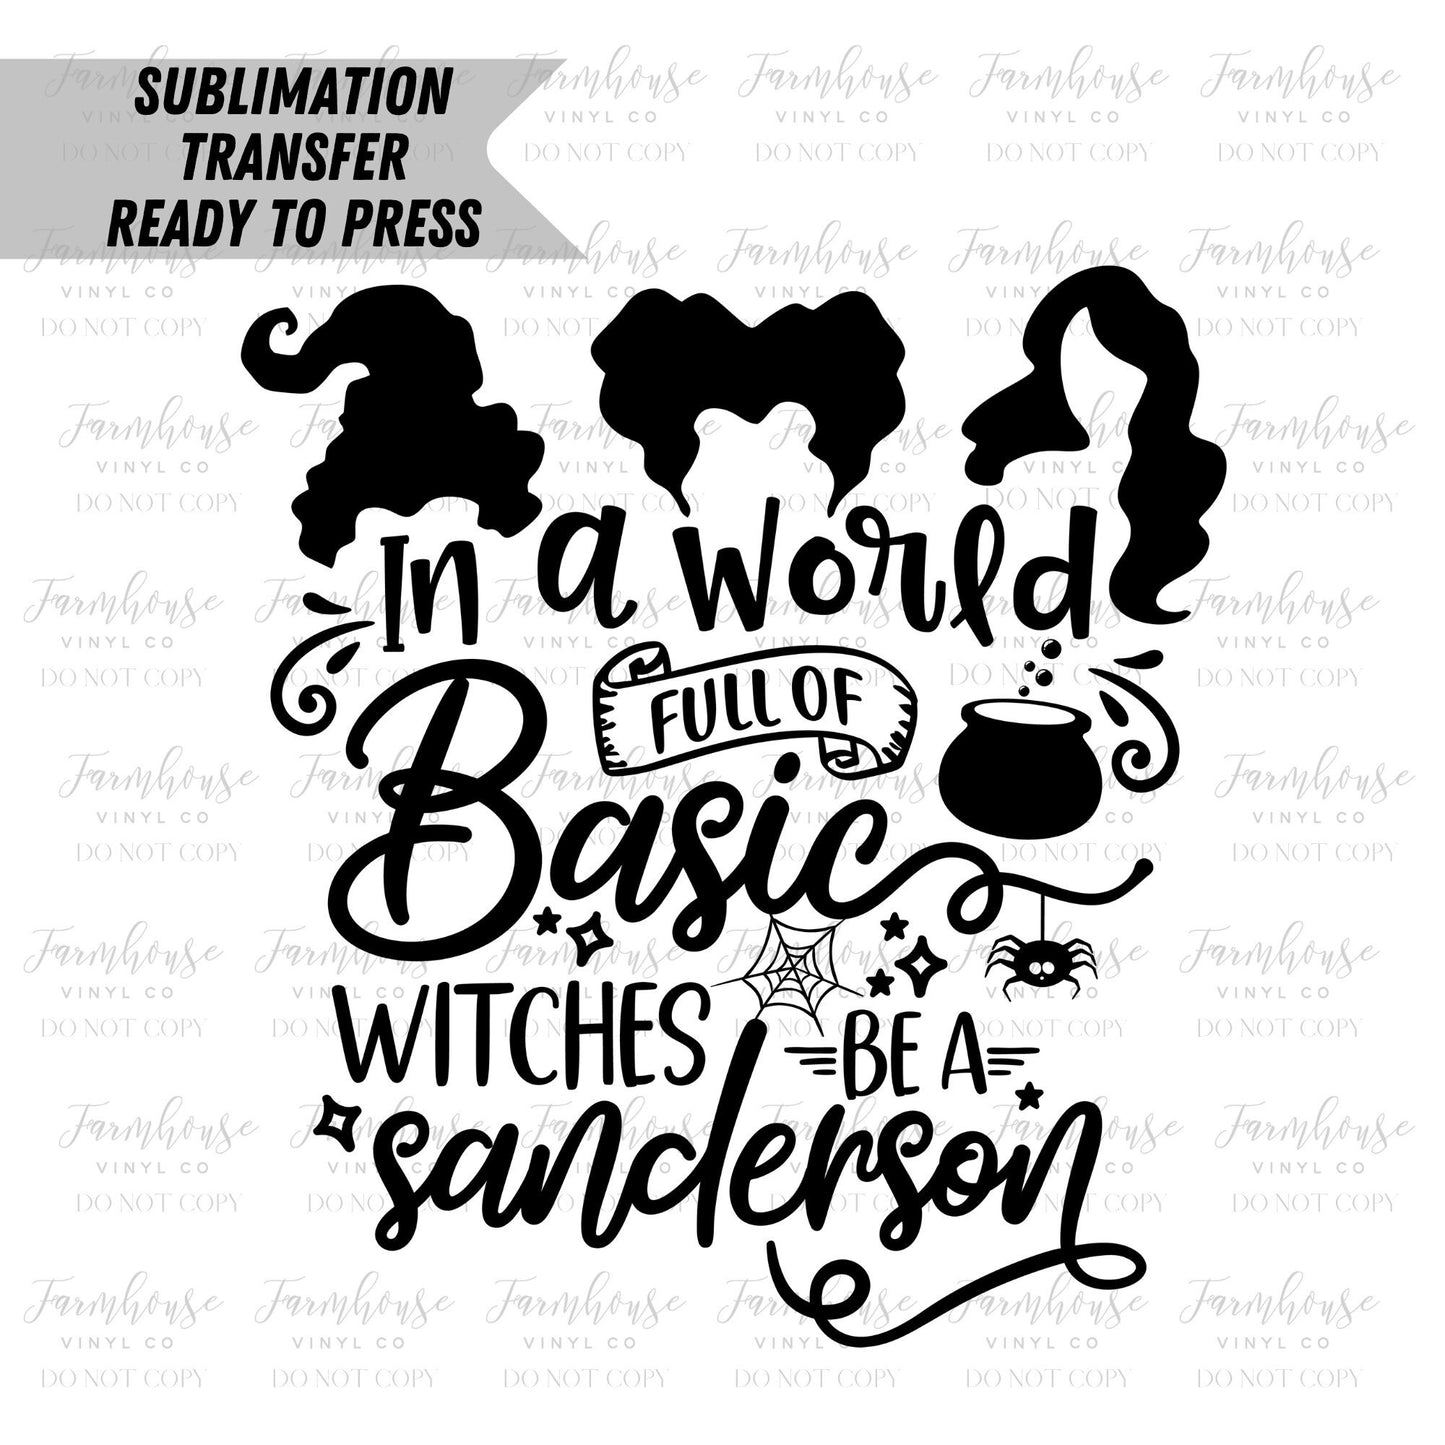 Don’t Be A Basic Witch Sanderson Design Ready to Press Sublimation Transfer - Farmhouse Vinyl Co